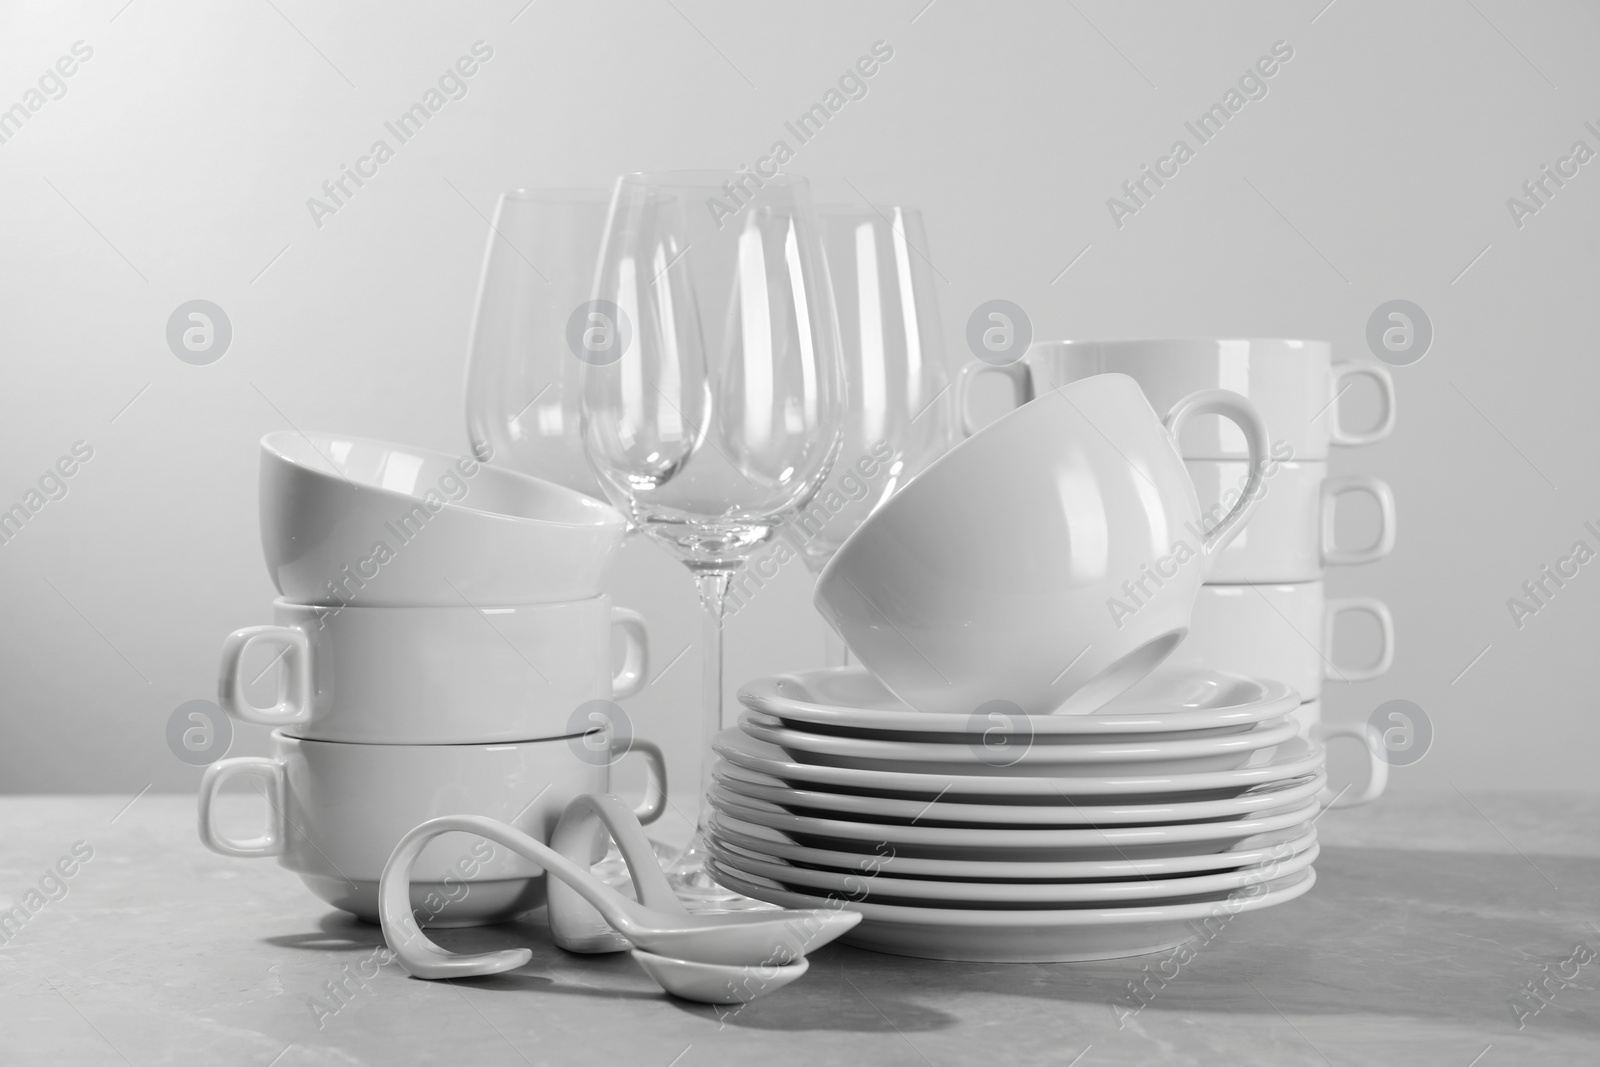 Photo of Set of clean dishware and glasses on grey table against light background